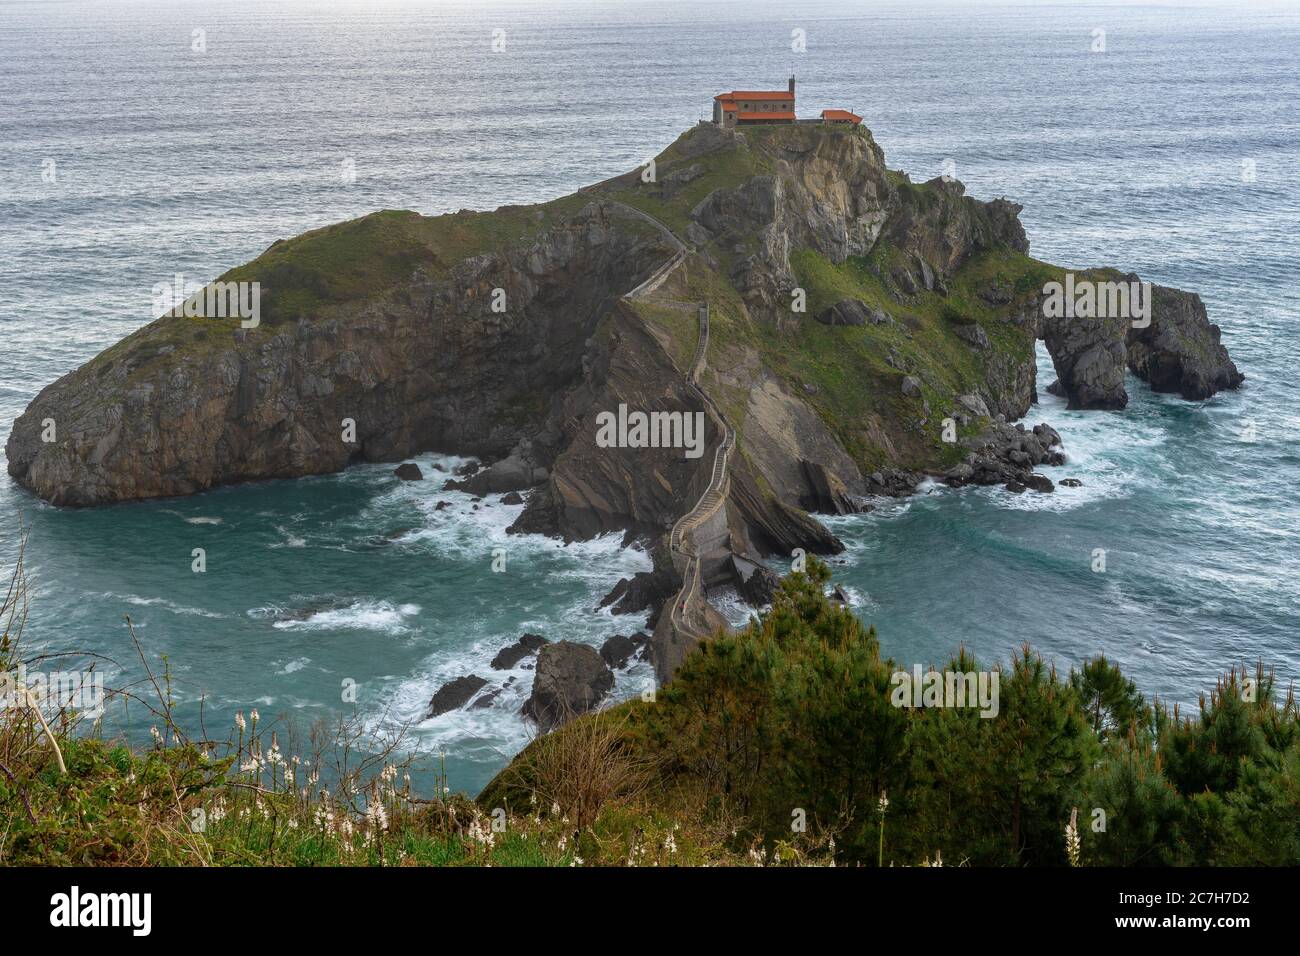 Europe, Spain, Basque Country, Biscay, Bay of Biscay, Costa Vasca, view of Gaztelugatxe Stock Photo